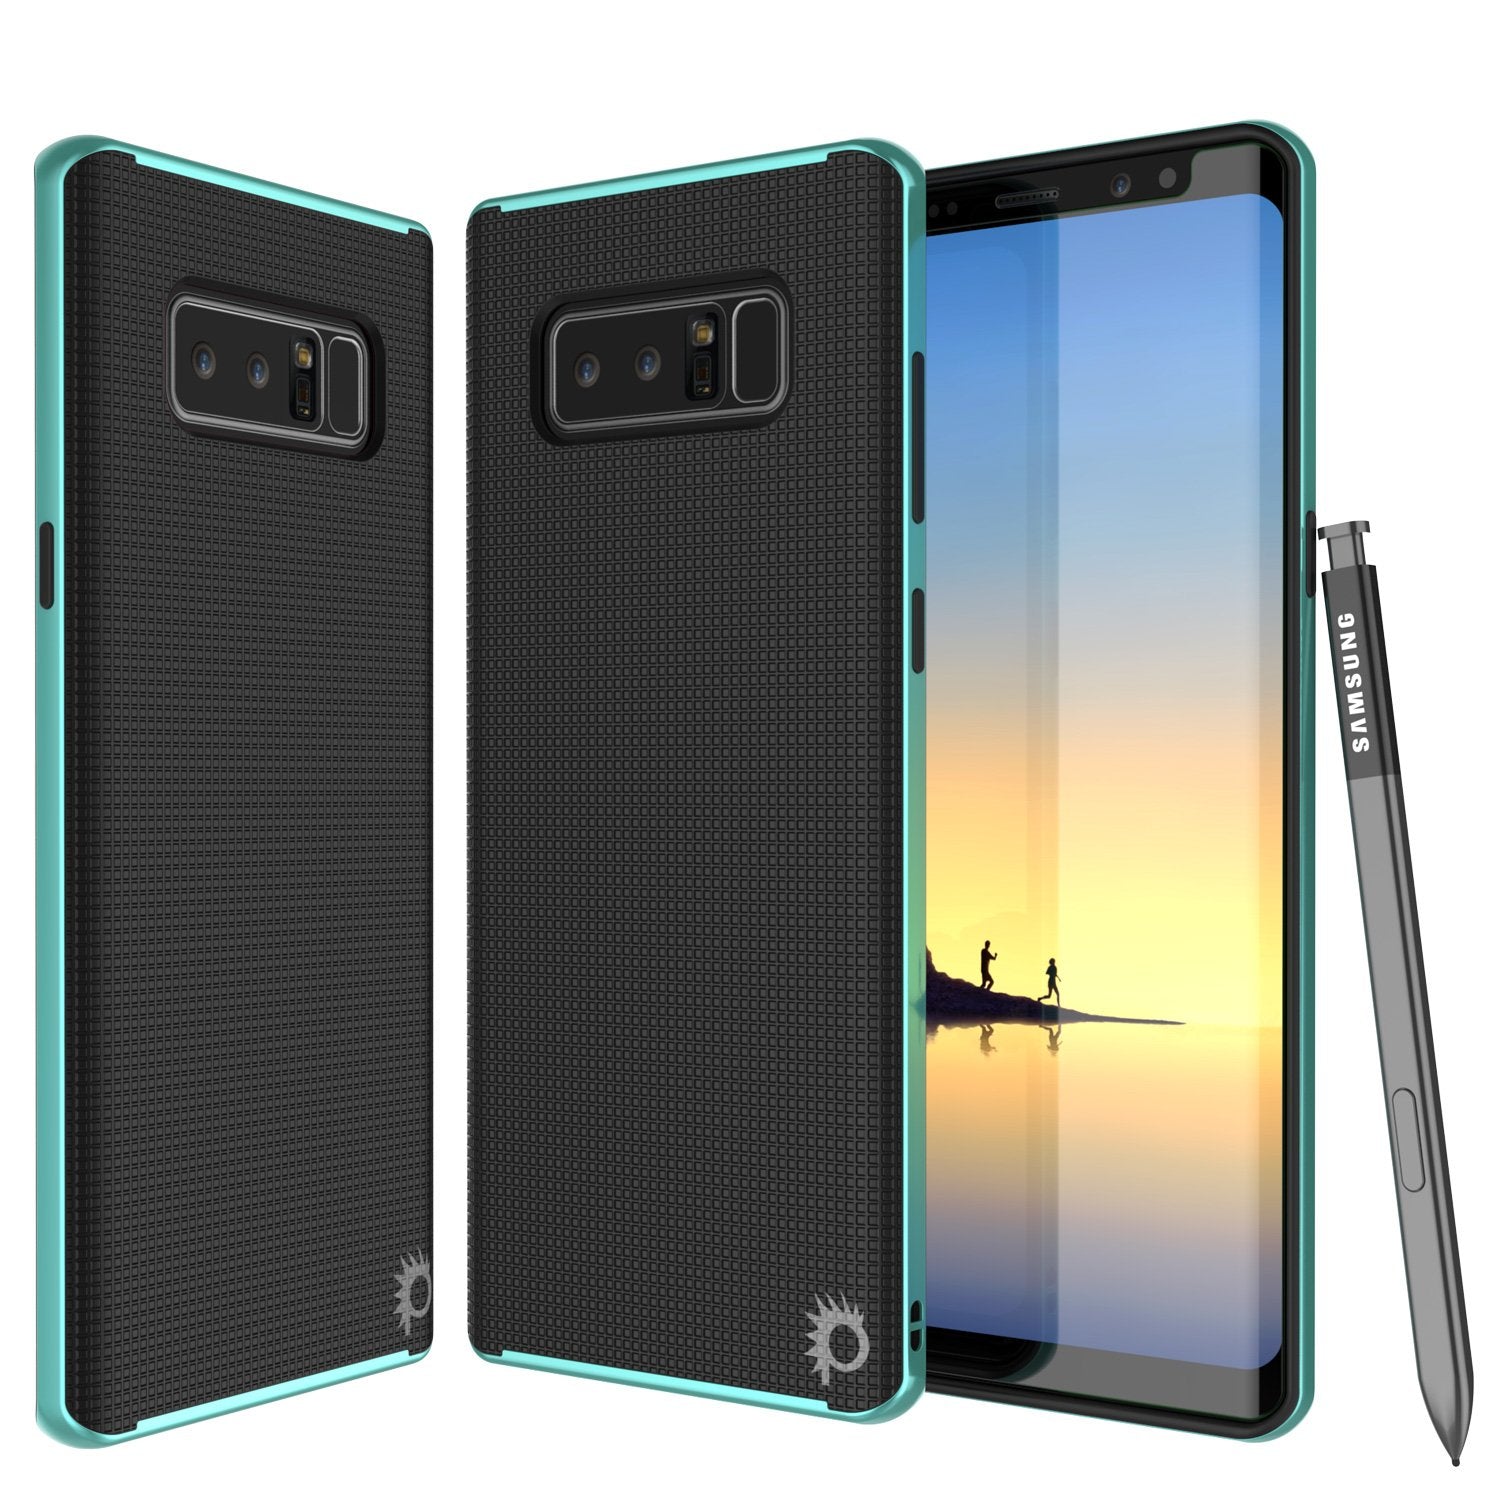 Galaxy Note 8 Case, PunkCase [Stealth Series] Hybrid 3-Piece Shockproof Dual Layer Cover [Non-Slip] [Soft TPU + PC Bumper] with PUNKSHIELD Screen Protector for Samsung Note 8 [Teal]